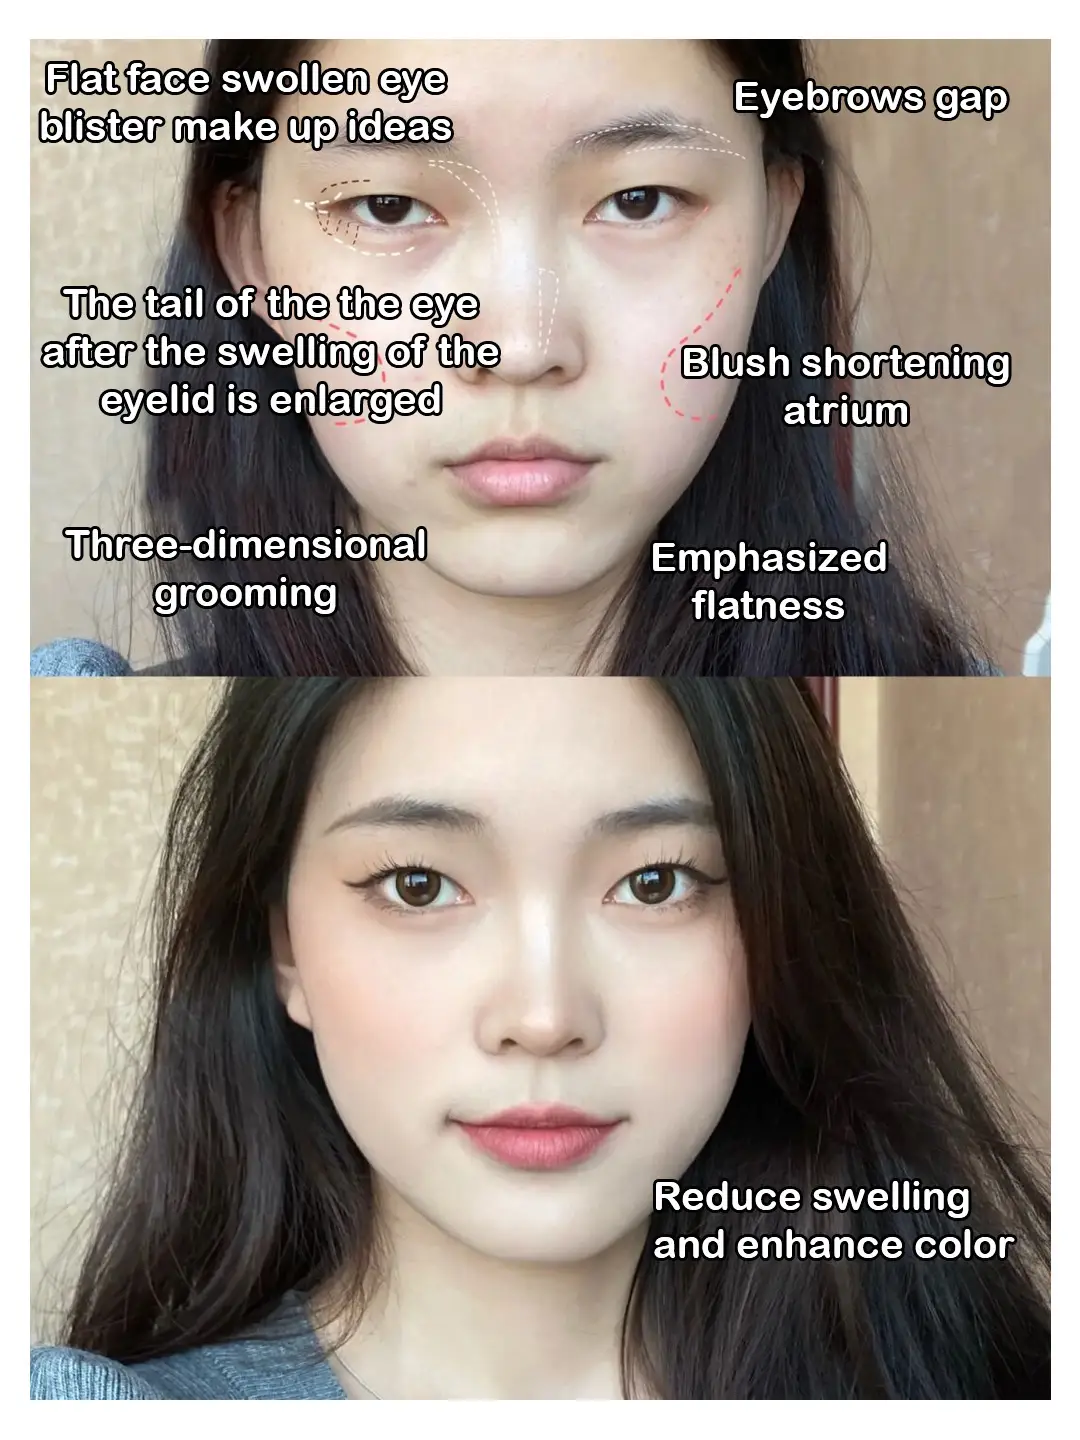 HOW TO DO A FULL FACE MAKEUP TUTORIAL FOR BEGINNERS. / UPDATED 